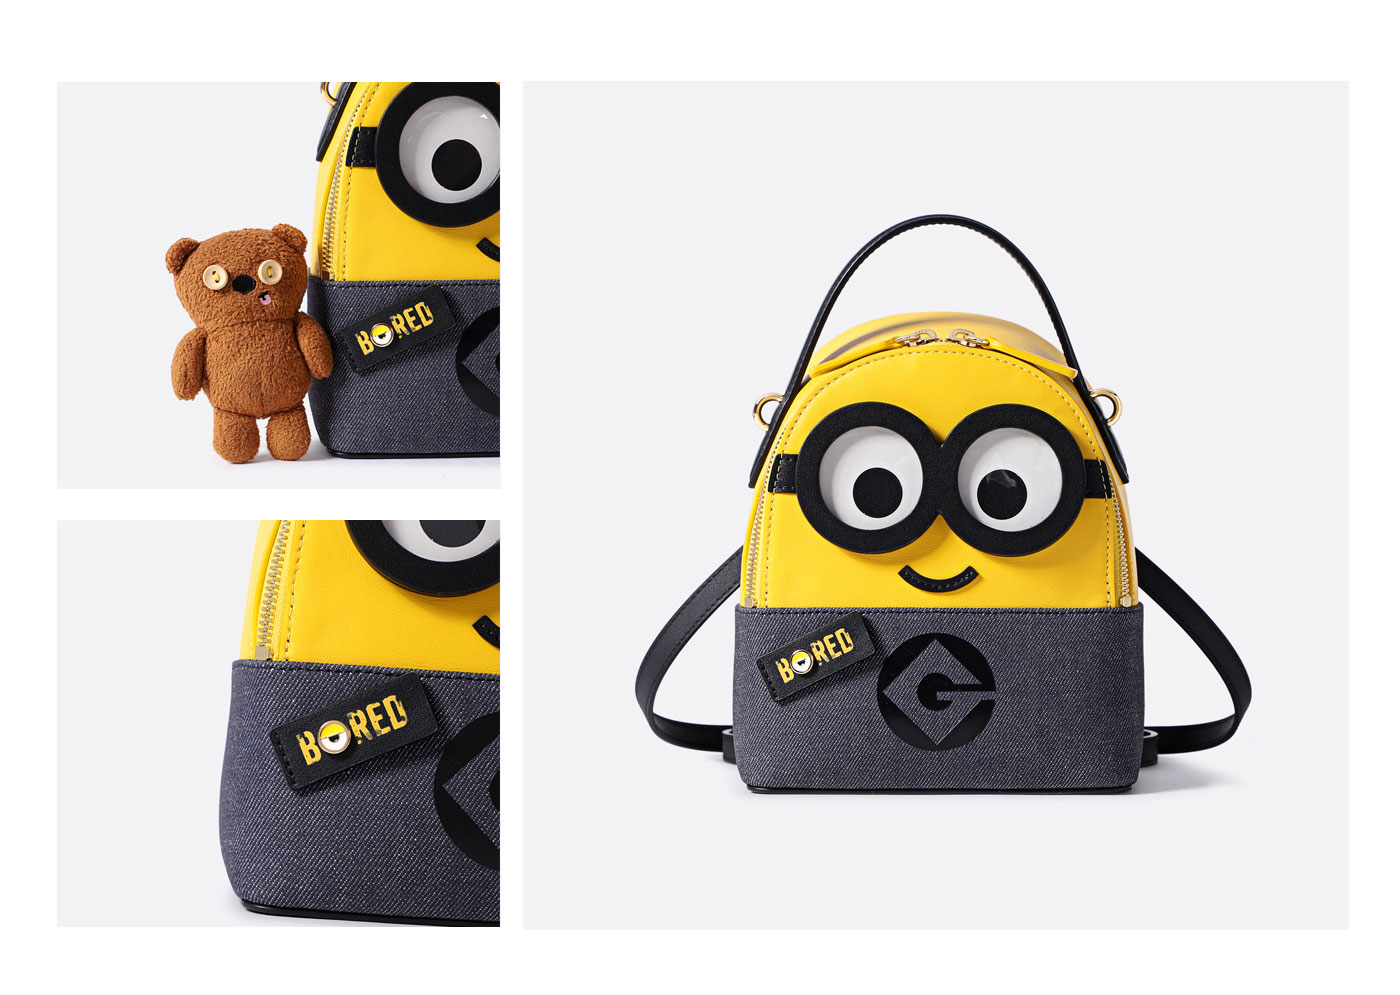 Perfect back view with minions backpack with teddy bear